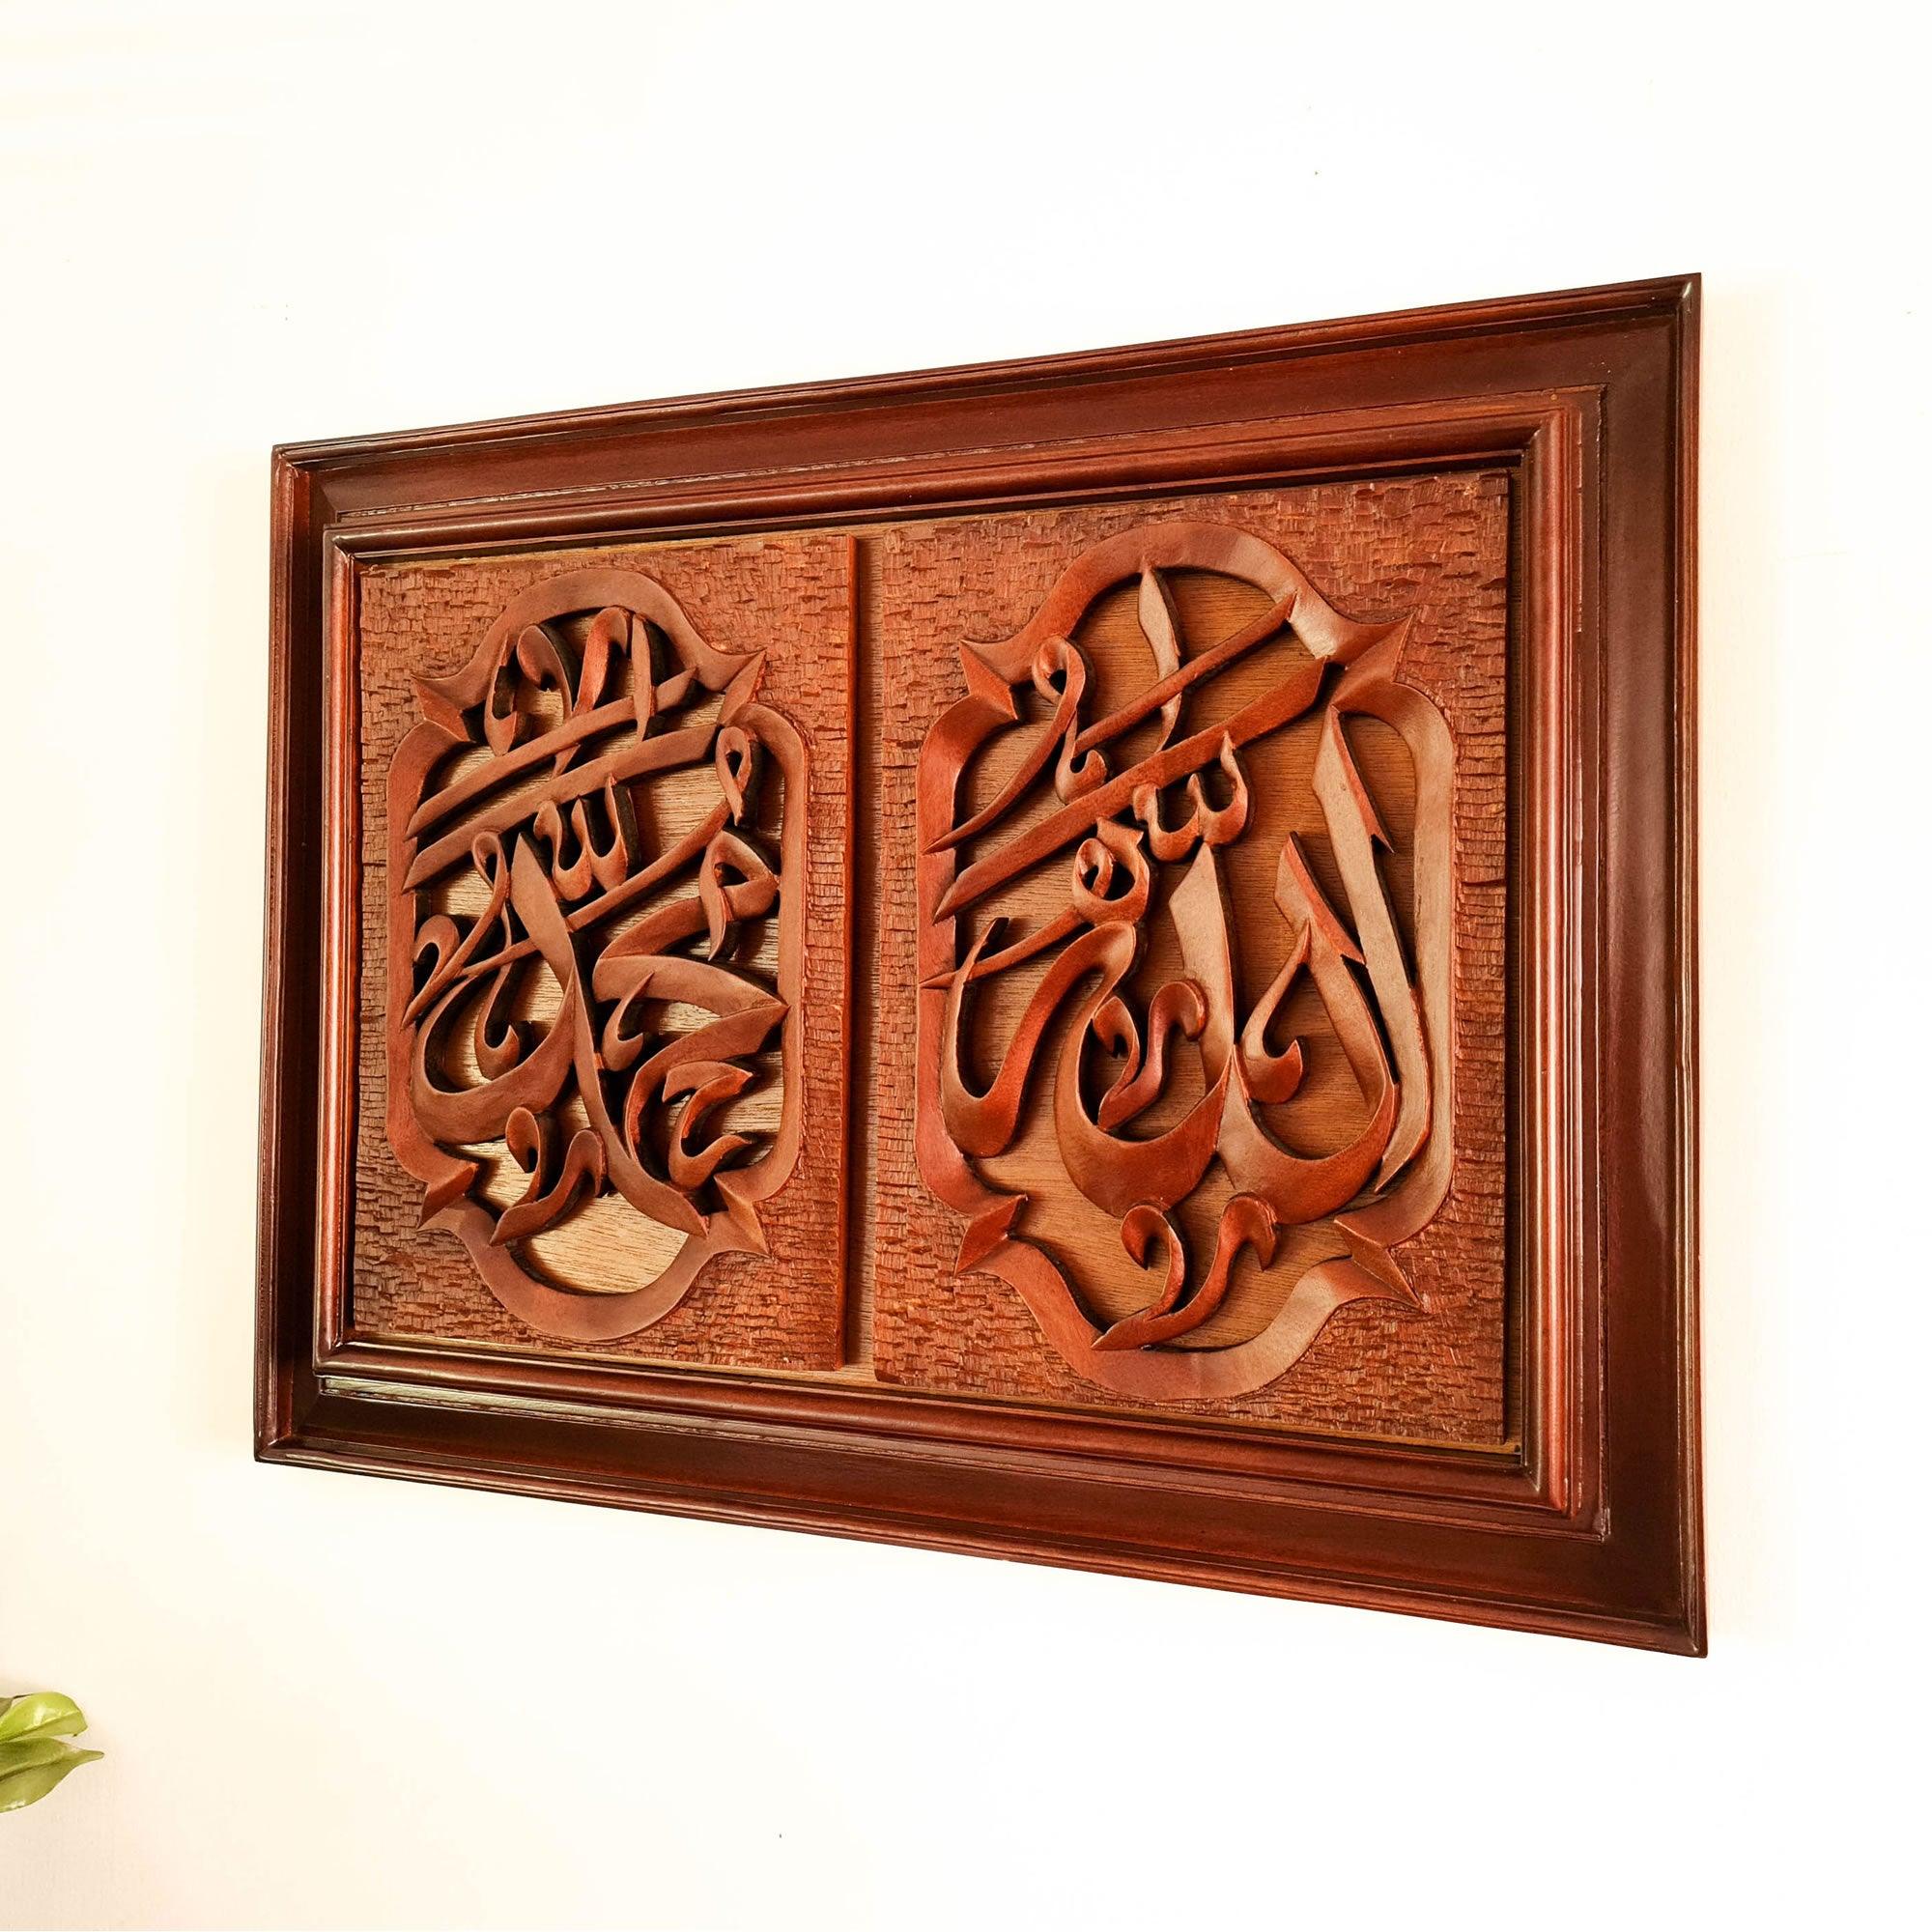 Hand Carved Wooden Art Sculpture - Islamic Allah Muhammad Calligraphy, A perfect gift this season